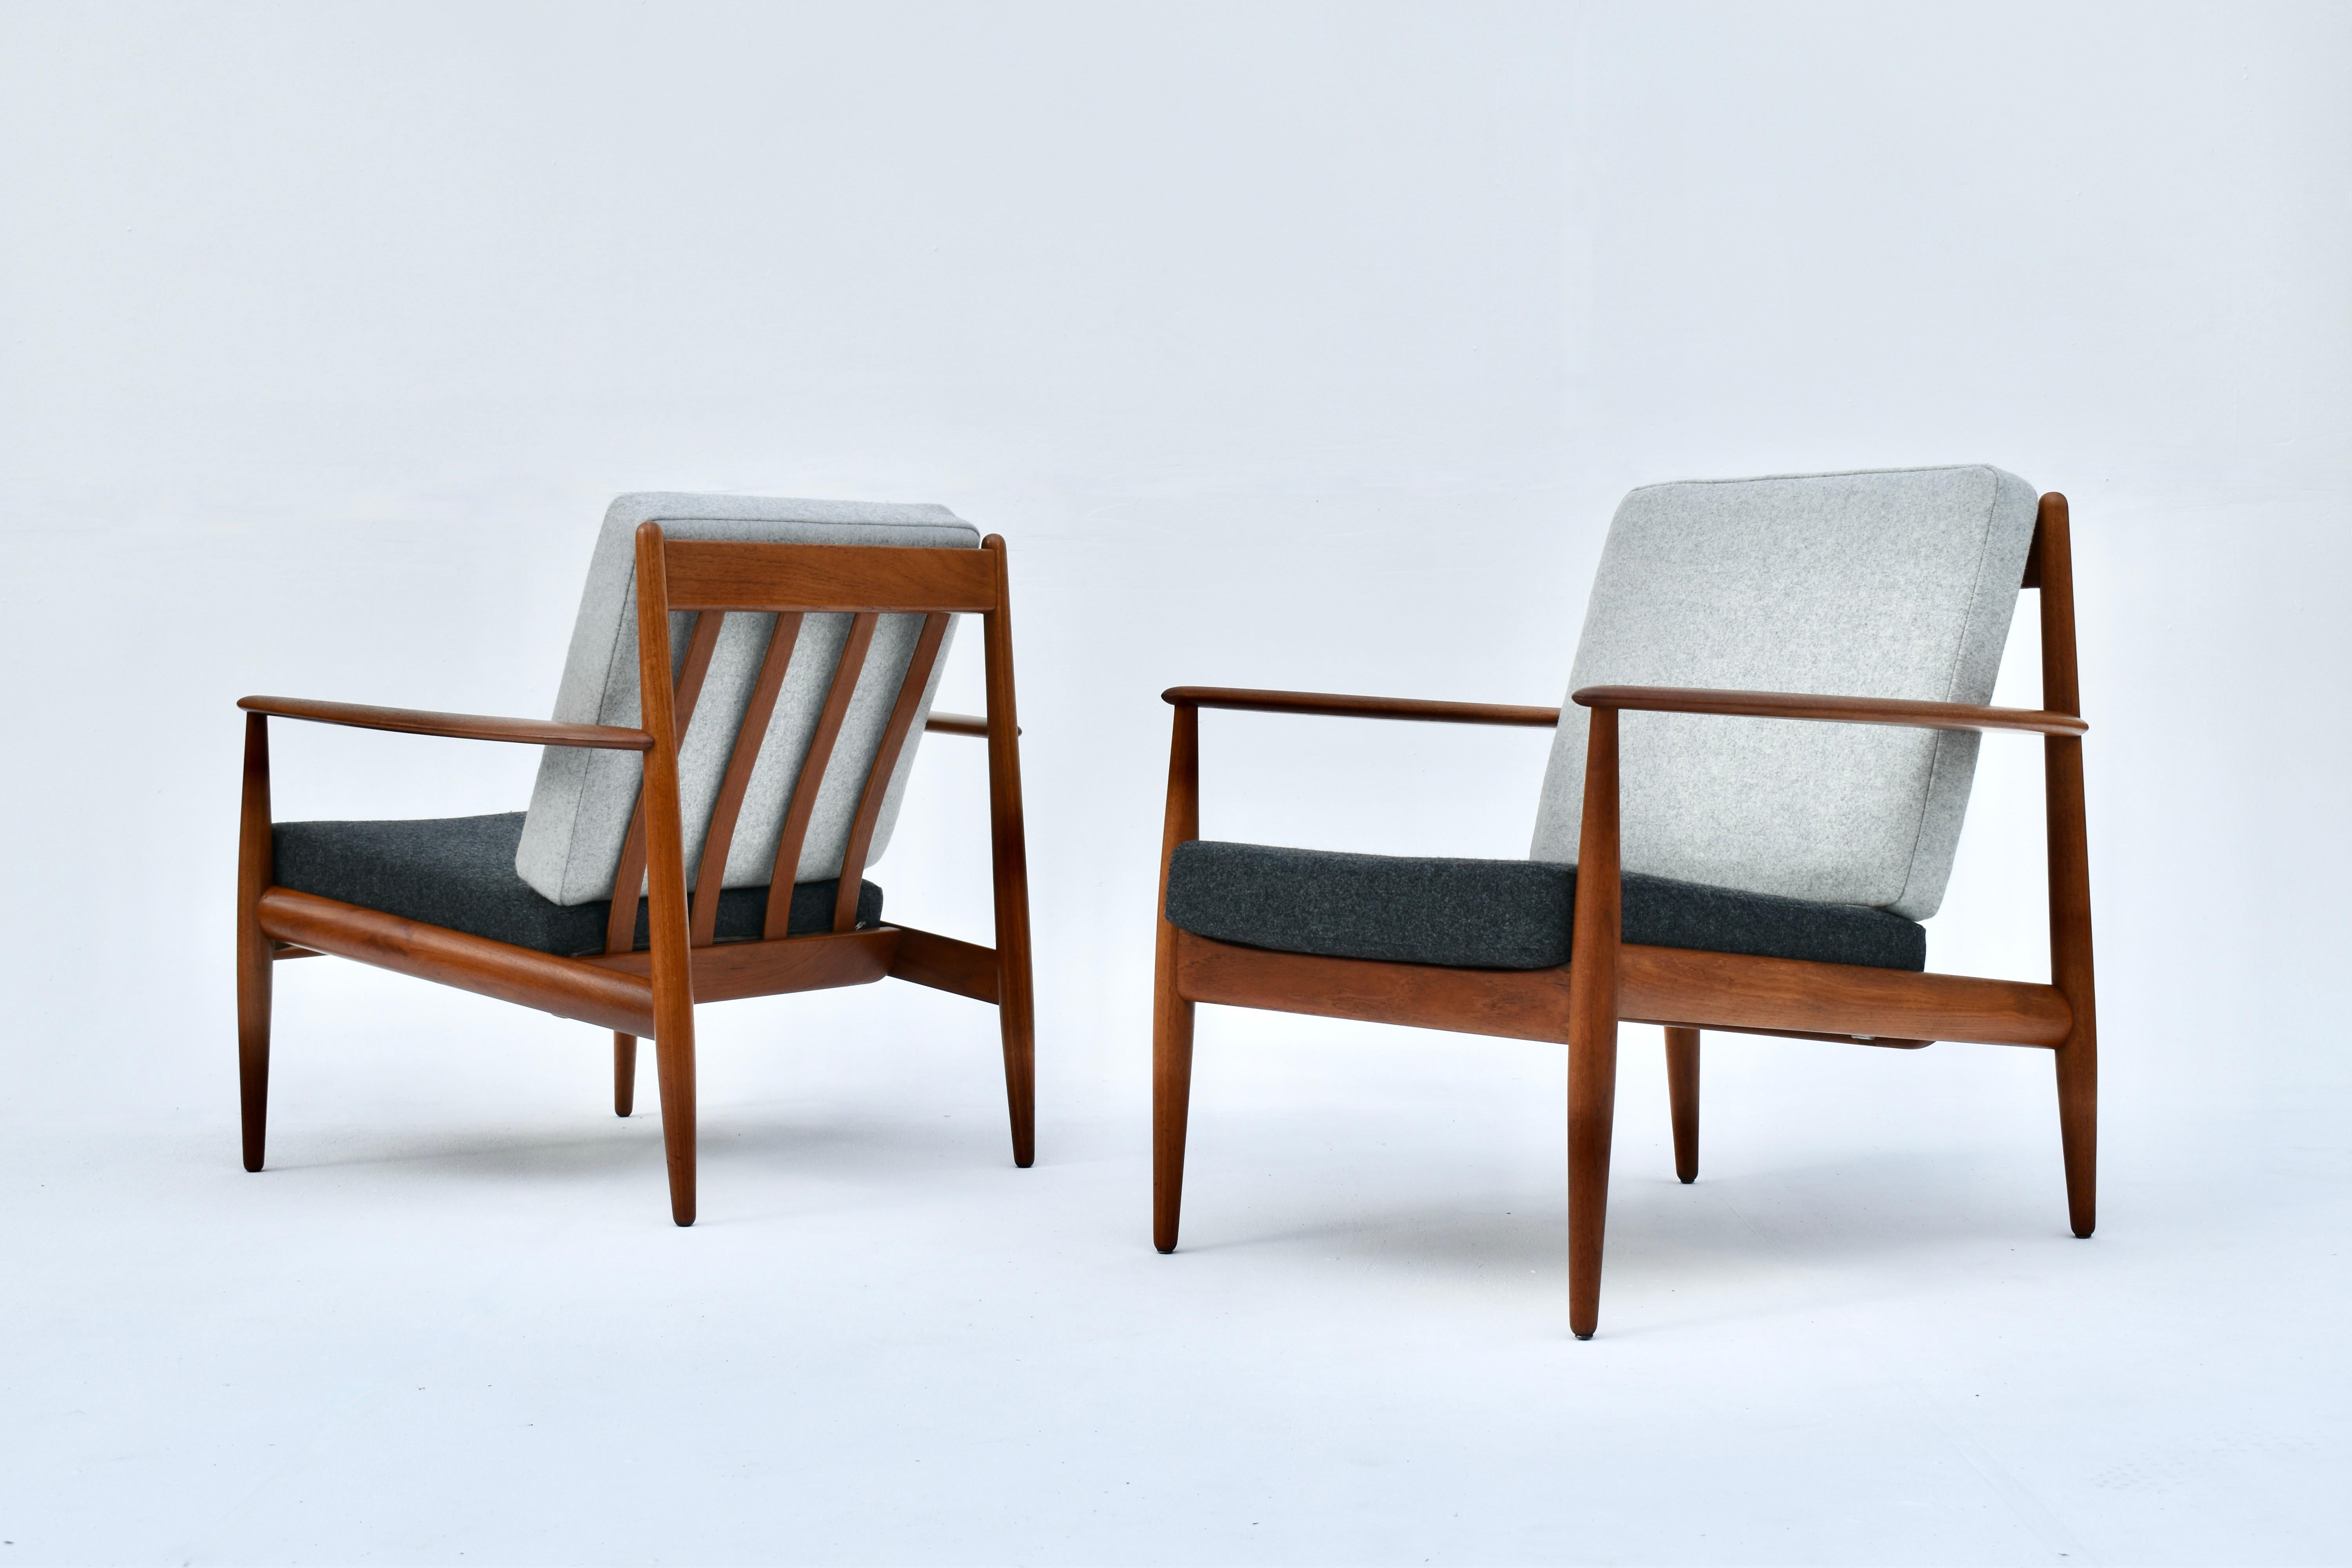 A beautiful pair of solid teak lounge chairs designed by Grete Jalk in the mid 50’s for France & Son, Denmark.

These are early production chairs and the most desirable in our opinion.

Each chair is offered in excellent condition. The foam